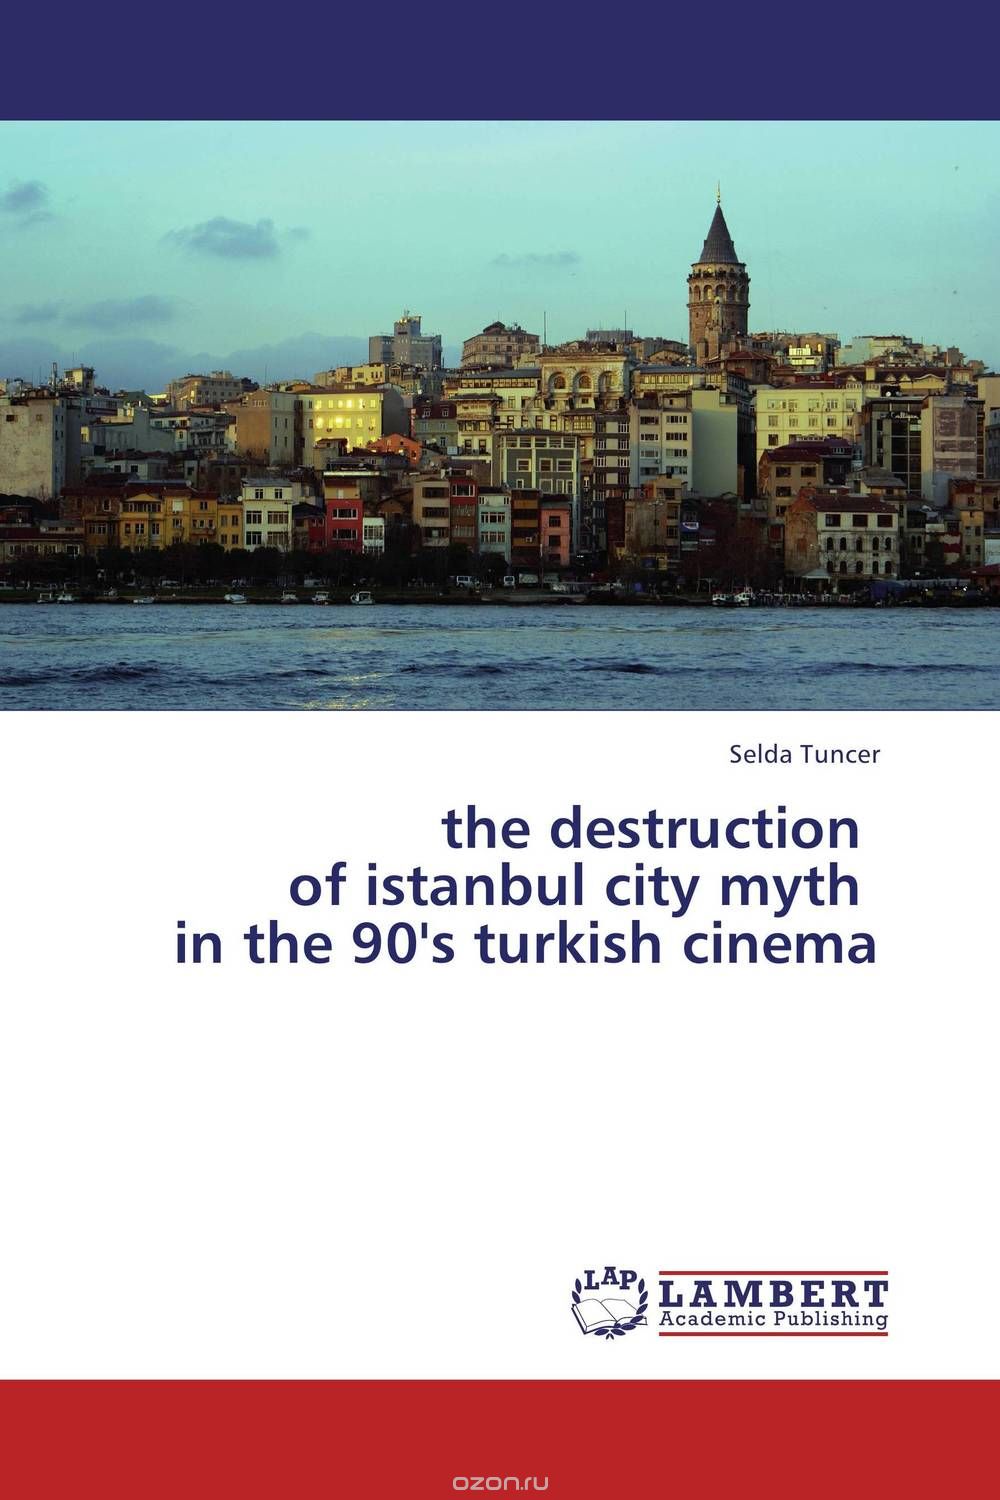 the destruction   of istanbul city myth   in the 90's turkish cinema